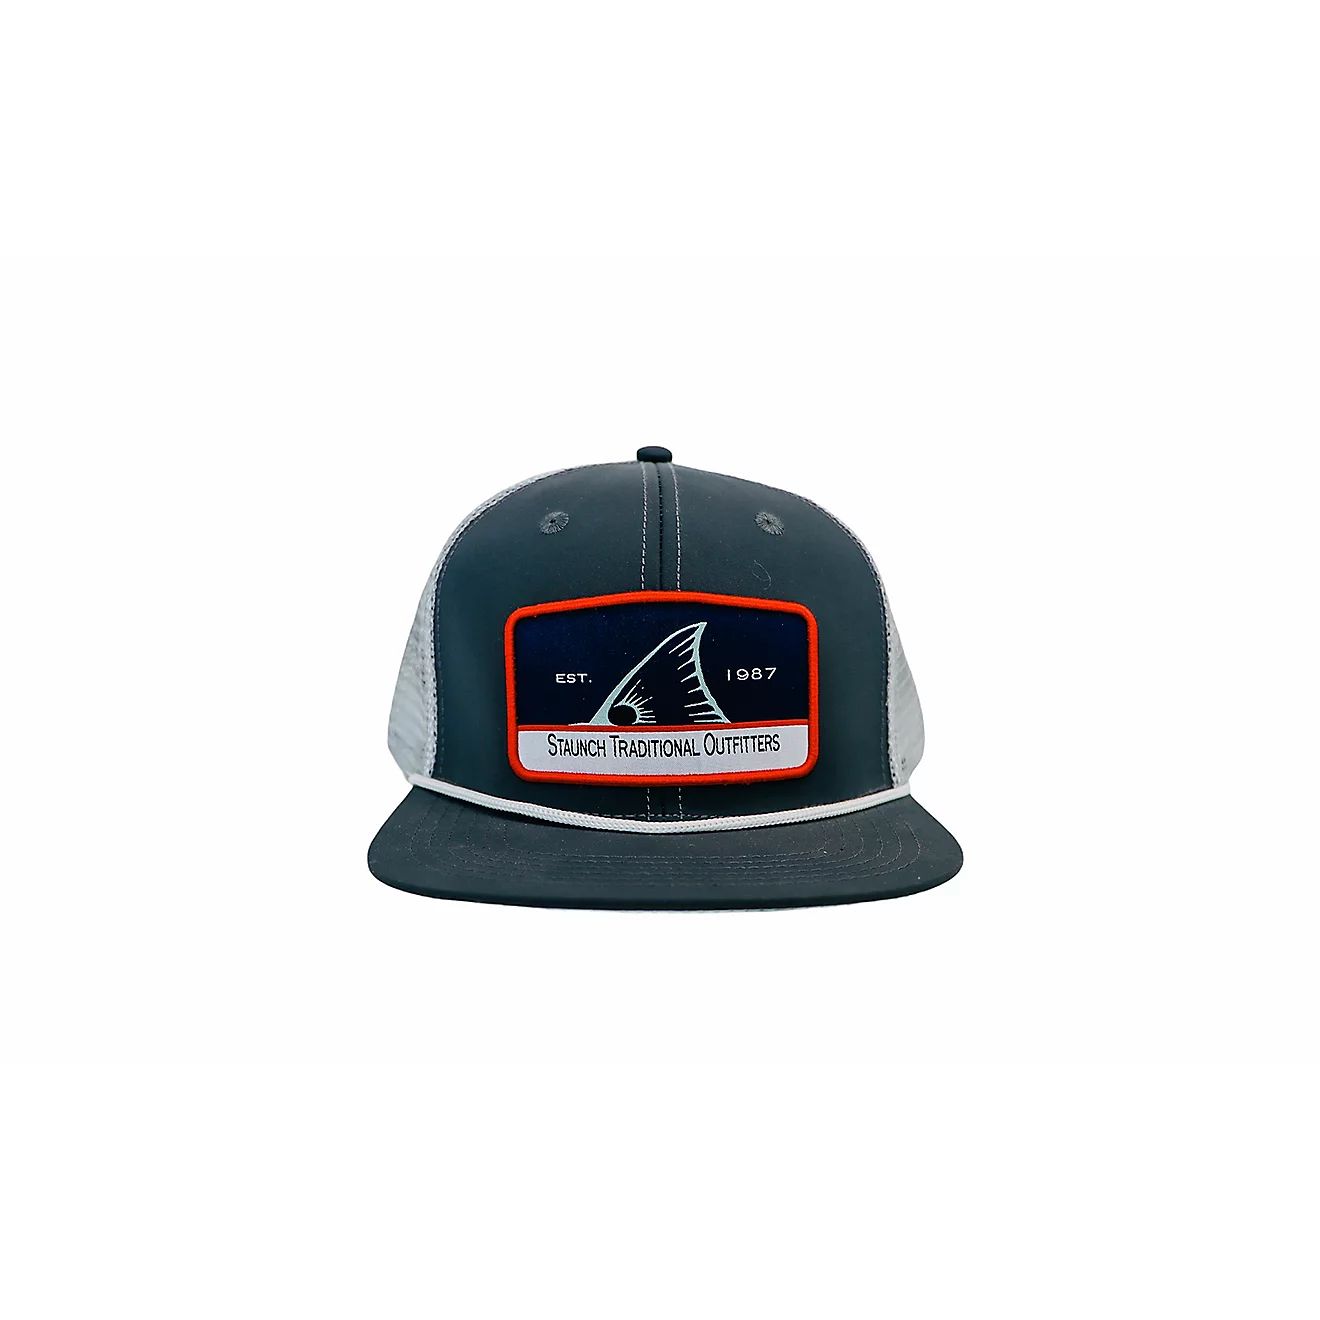 Staunch Traditional Outfitters Men’s Landcut Patch Cap | Academy Sports + Outdoors